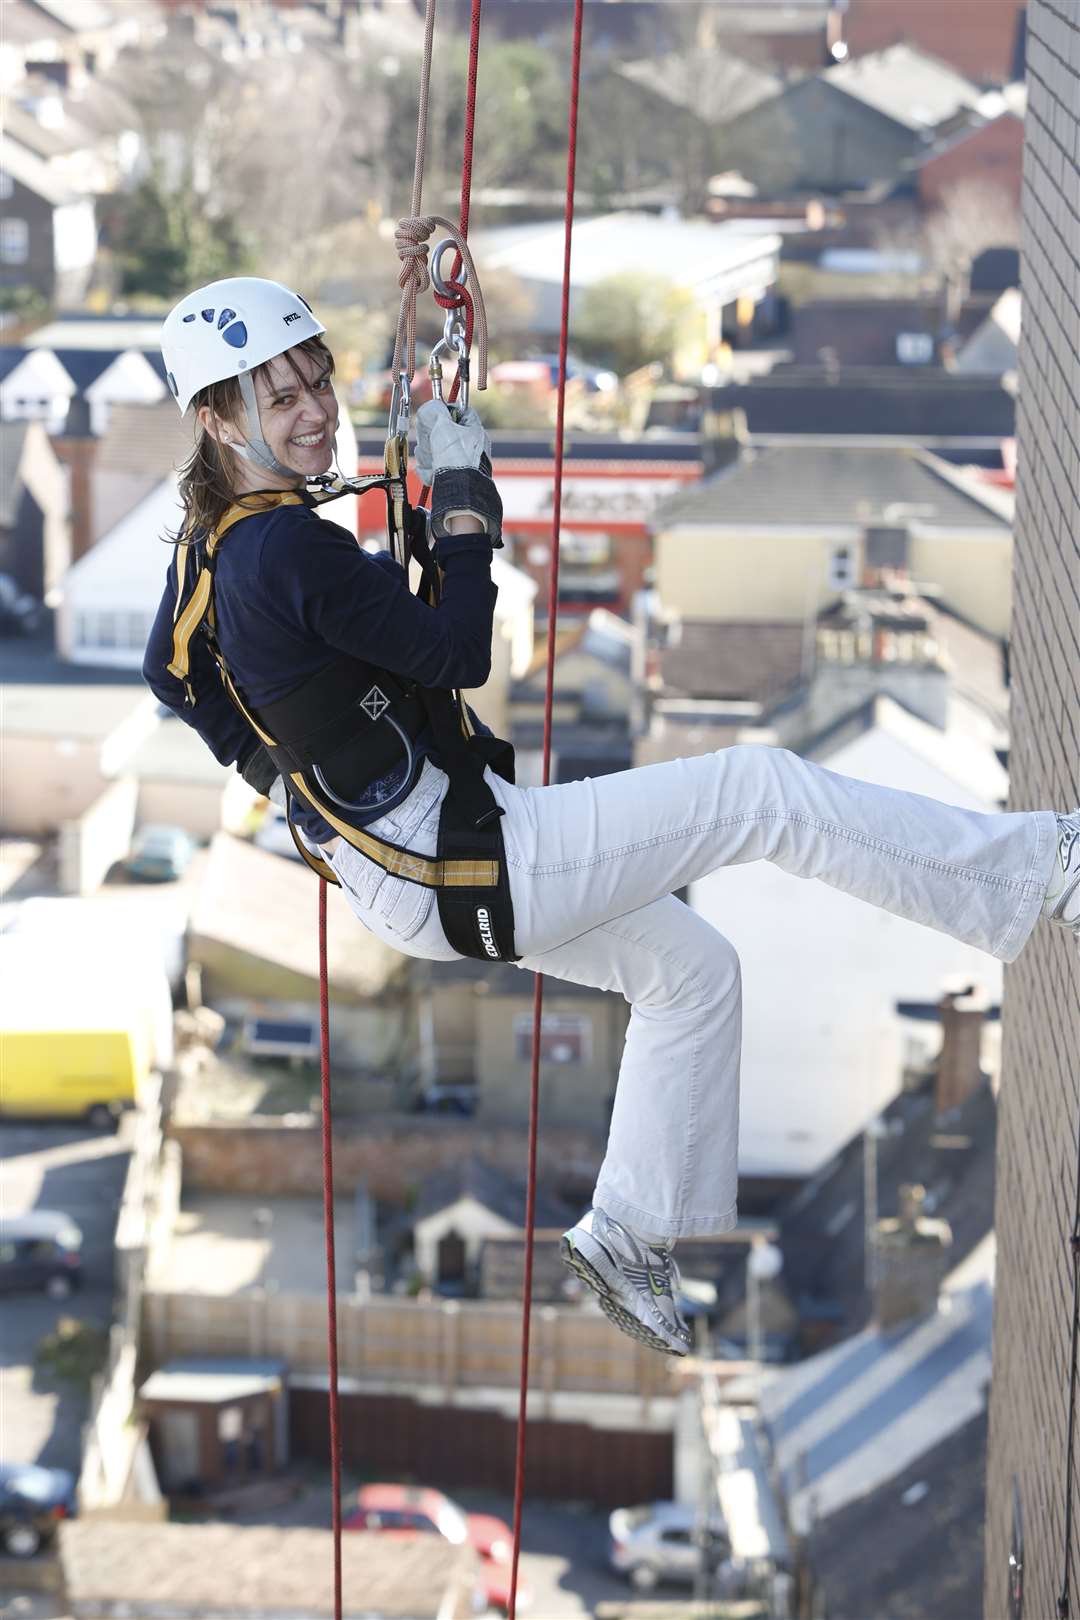 Ann-Marie Langley from event sponsor DSH on the way down during last year's KM abseil challenge at Miller House, Maidstone.